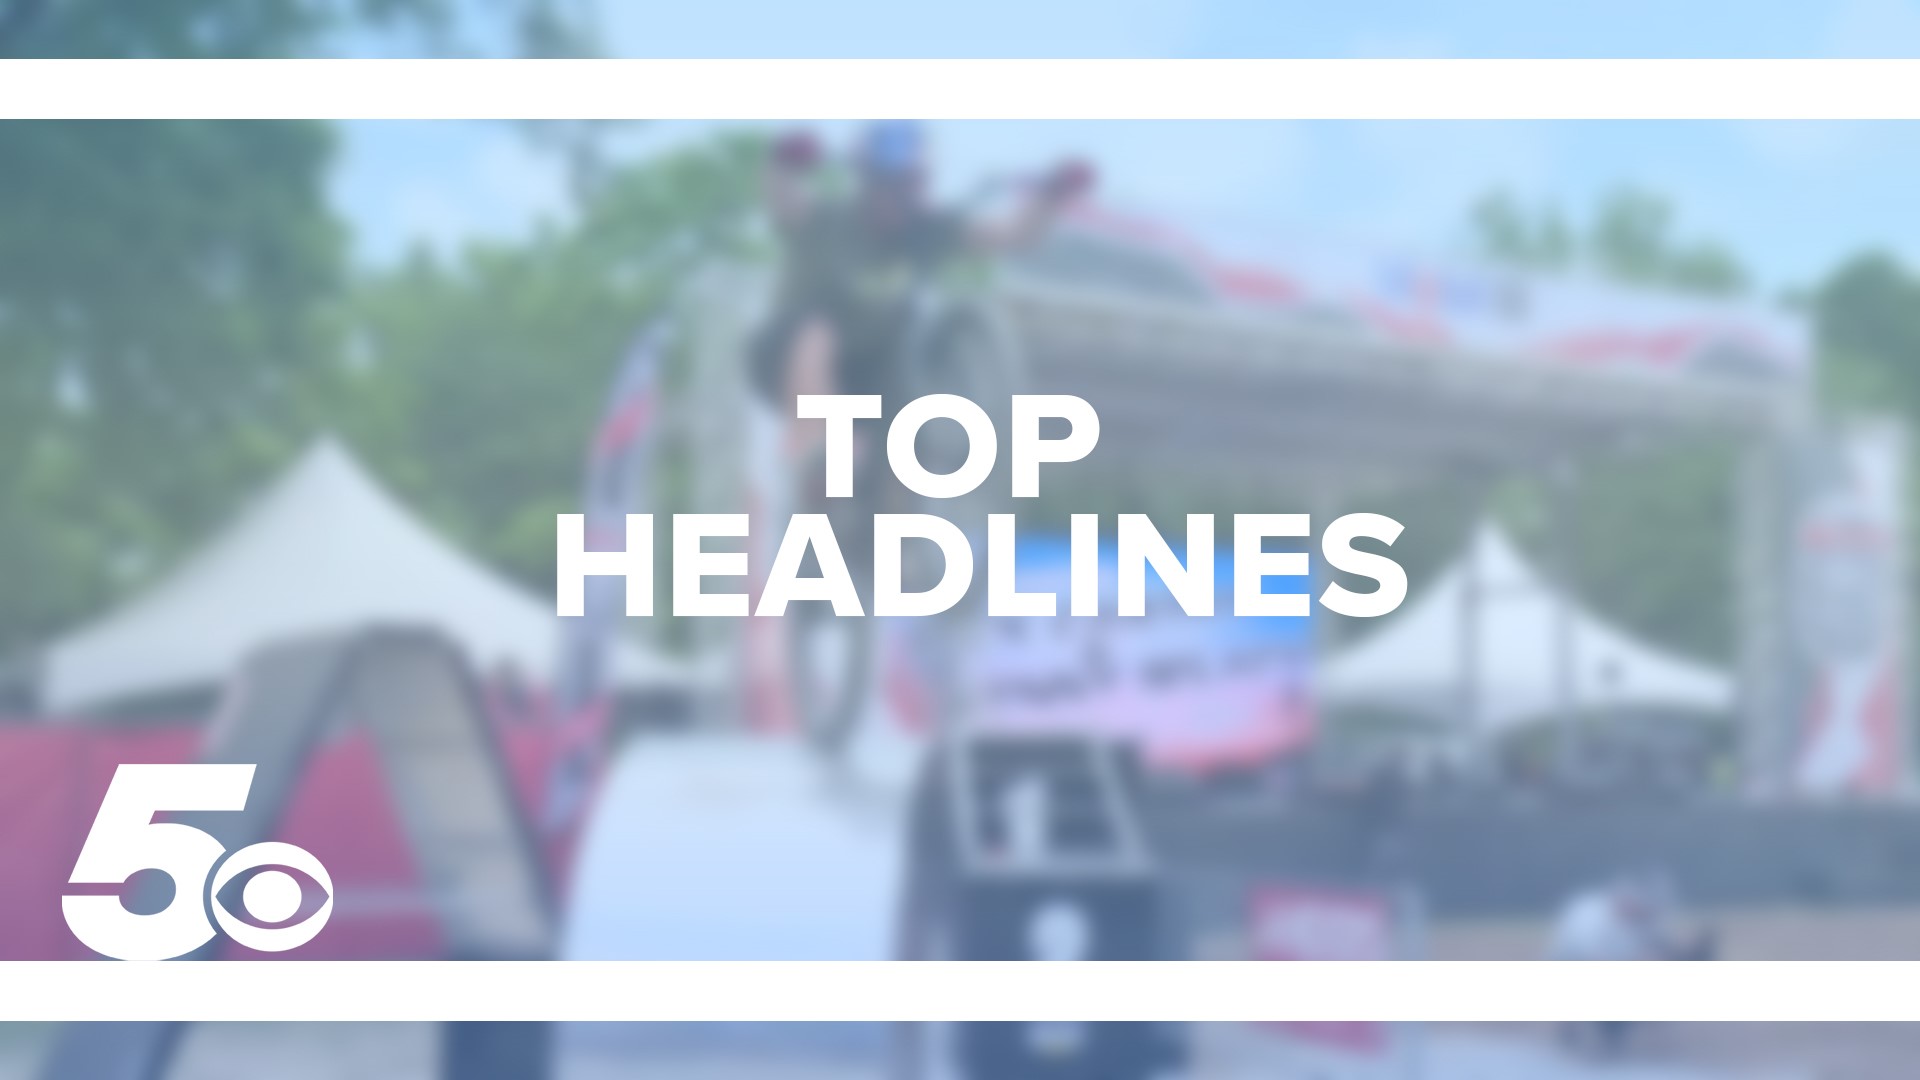 Take a look at today's top headlines for local new across Northwest Arkansas and the River Valley!